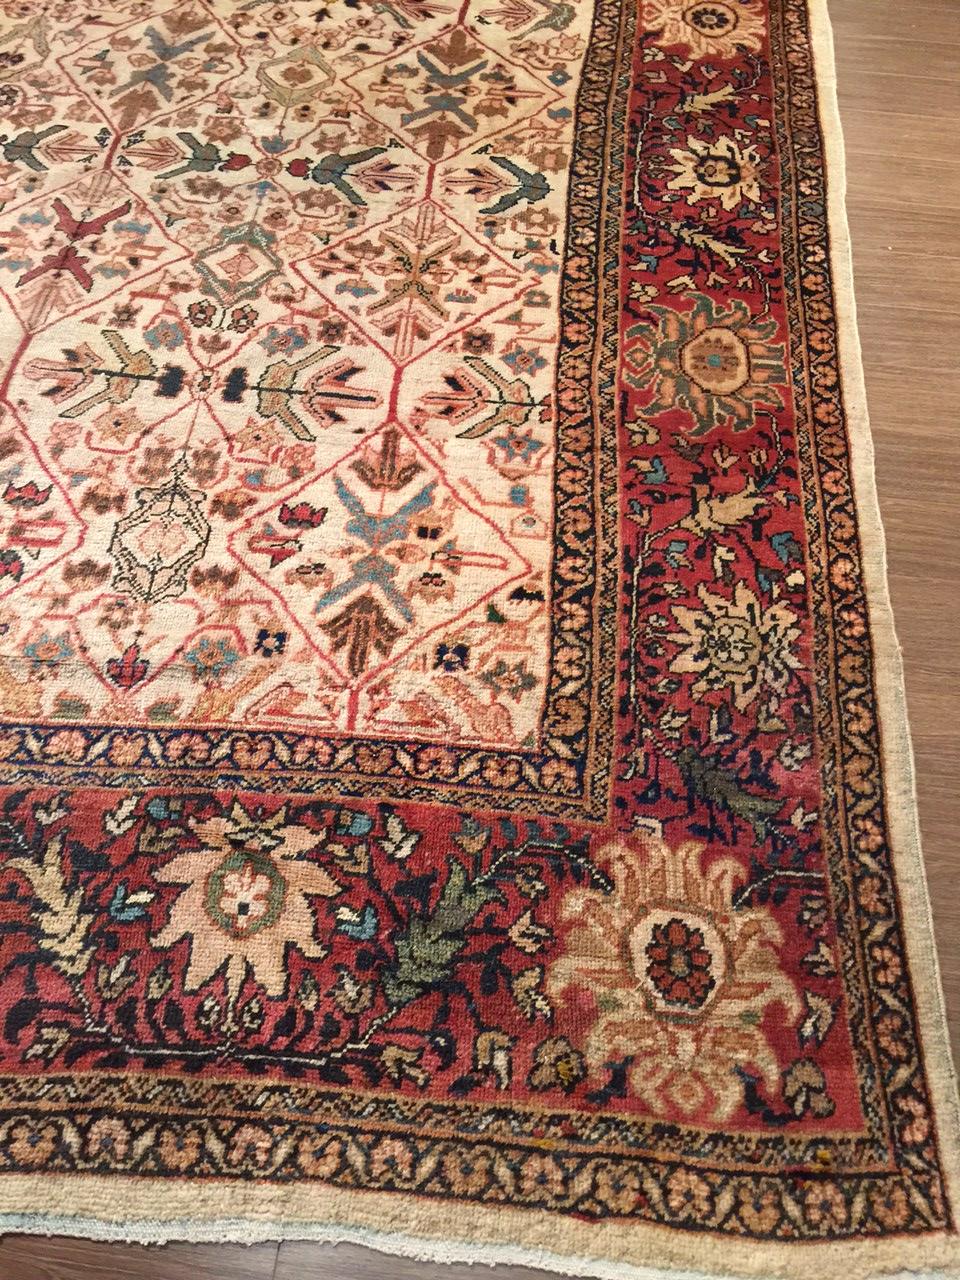 20th Century Antique Persian Ivory Mahal Area Rug 8'10x12'2 For Sale